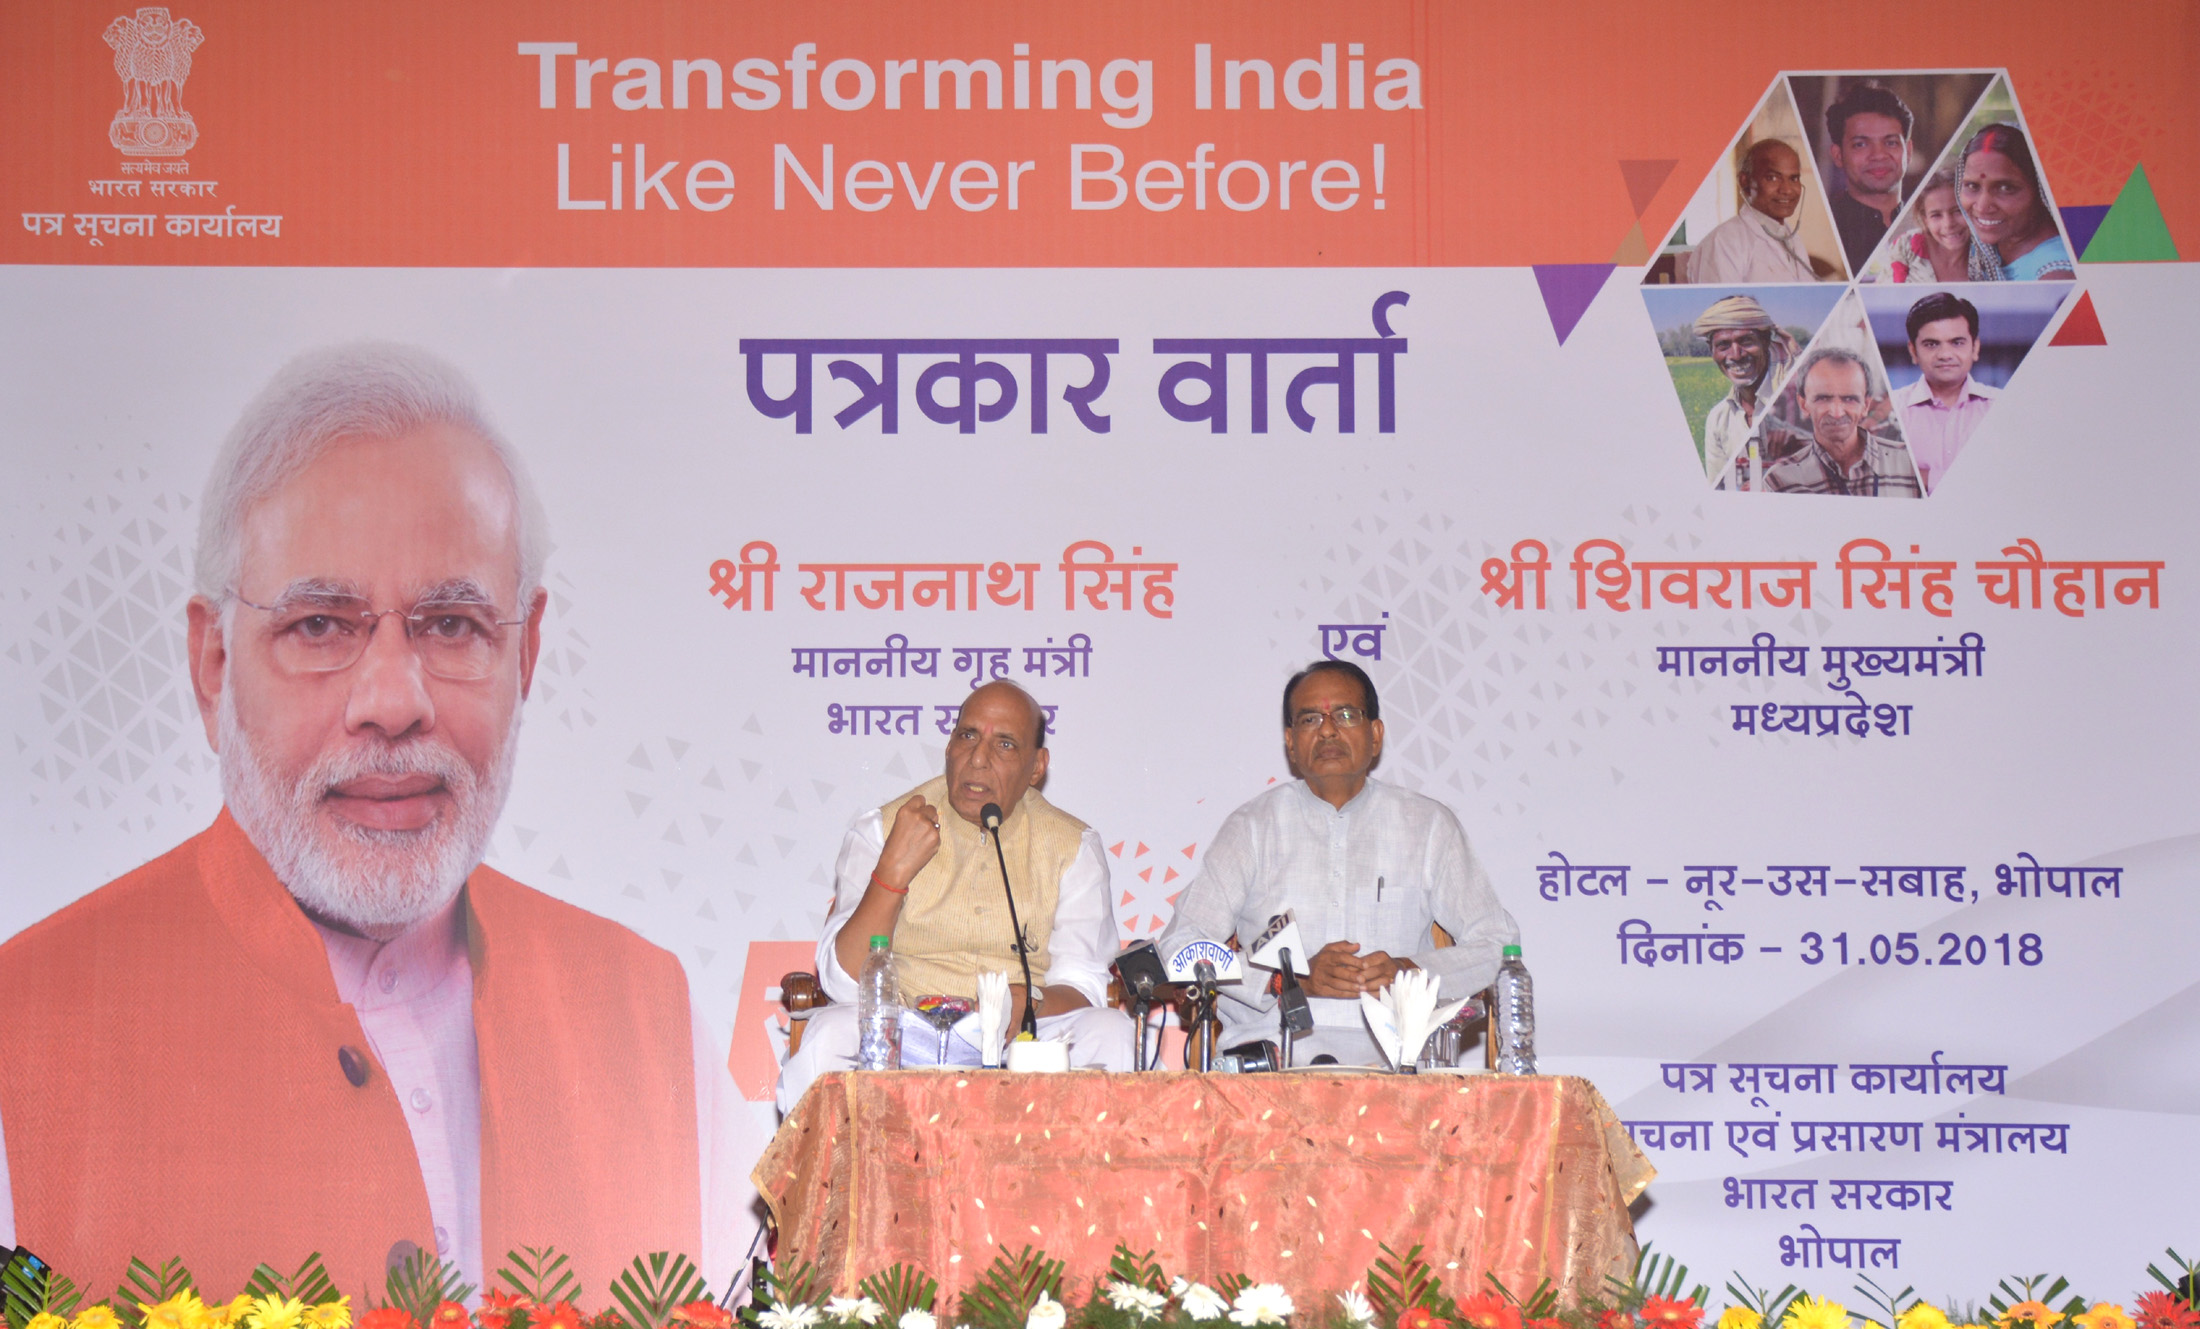 The Union Home Minister, Shri Rajnath Singh addressing a press conference, in Bhopal, Madhya Pradesh on May 31, 2018.  	The Chief Minister of Madhya Pradesh, Shri Shivraj Singh Chauhan is also seen.